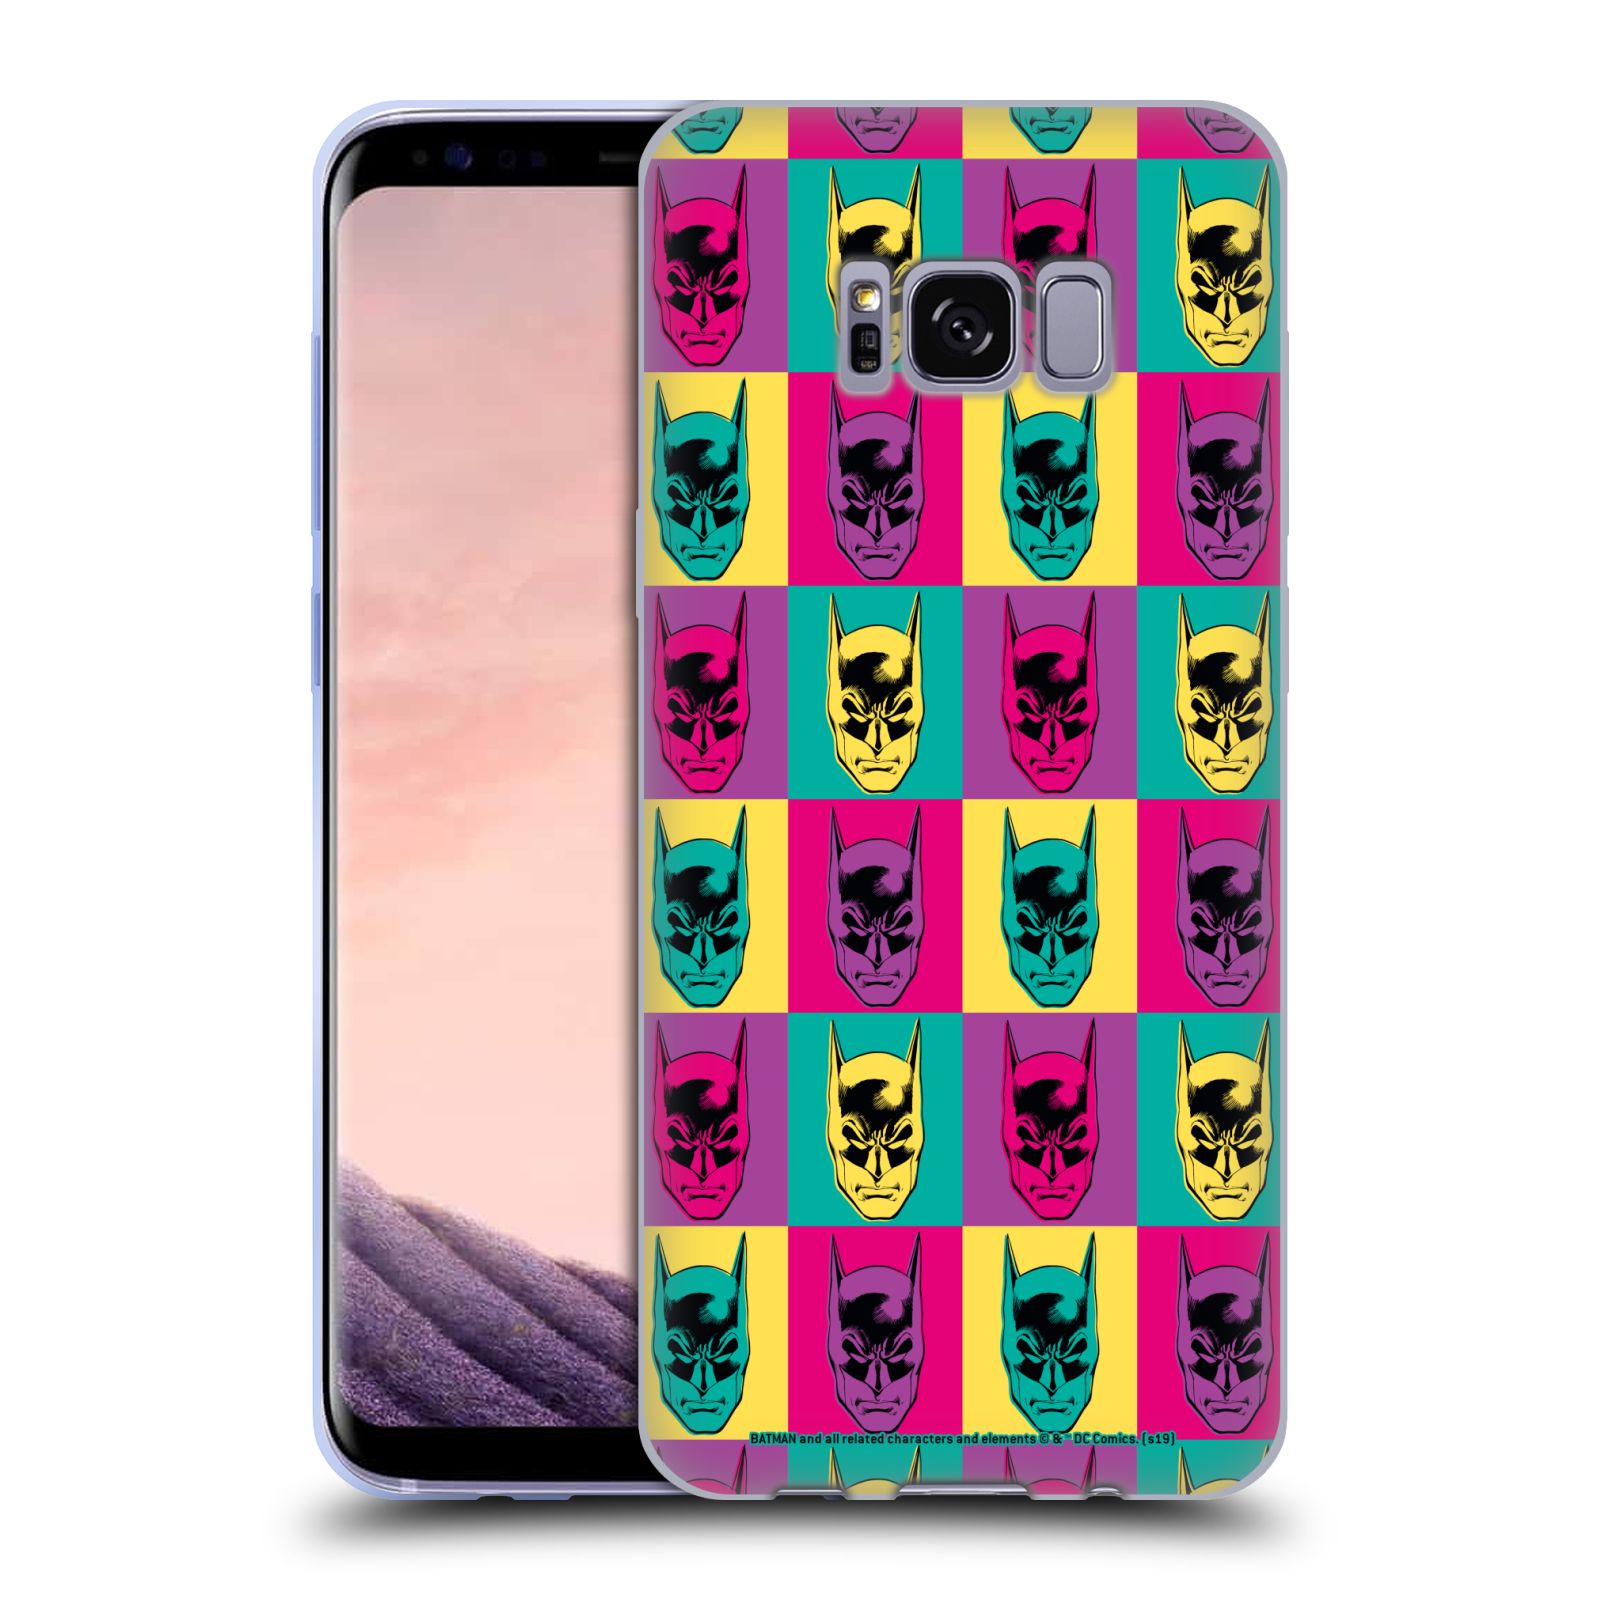 Head Case Designs Officially Licensed Batman DC Comics Vintage Fashion Pop Art Head Soft Gel Case Compatible with Samsung Galaxy S8 - image 1 of 7